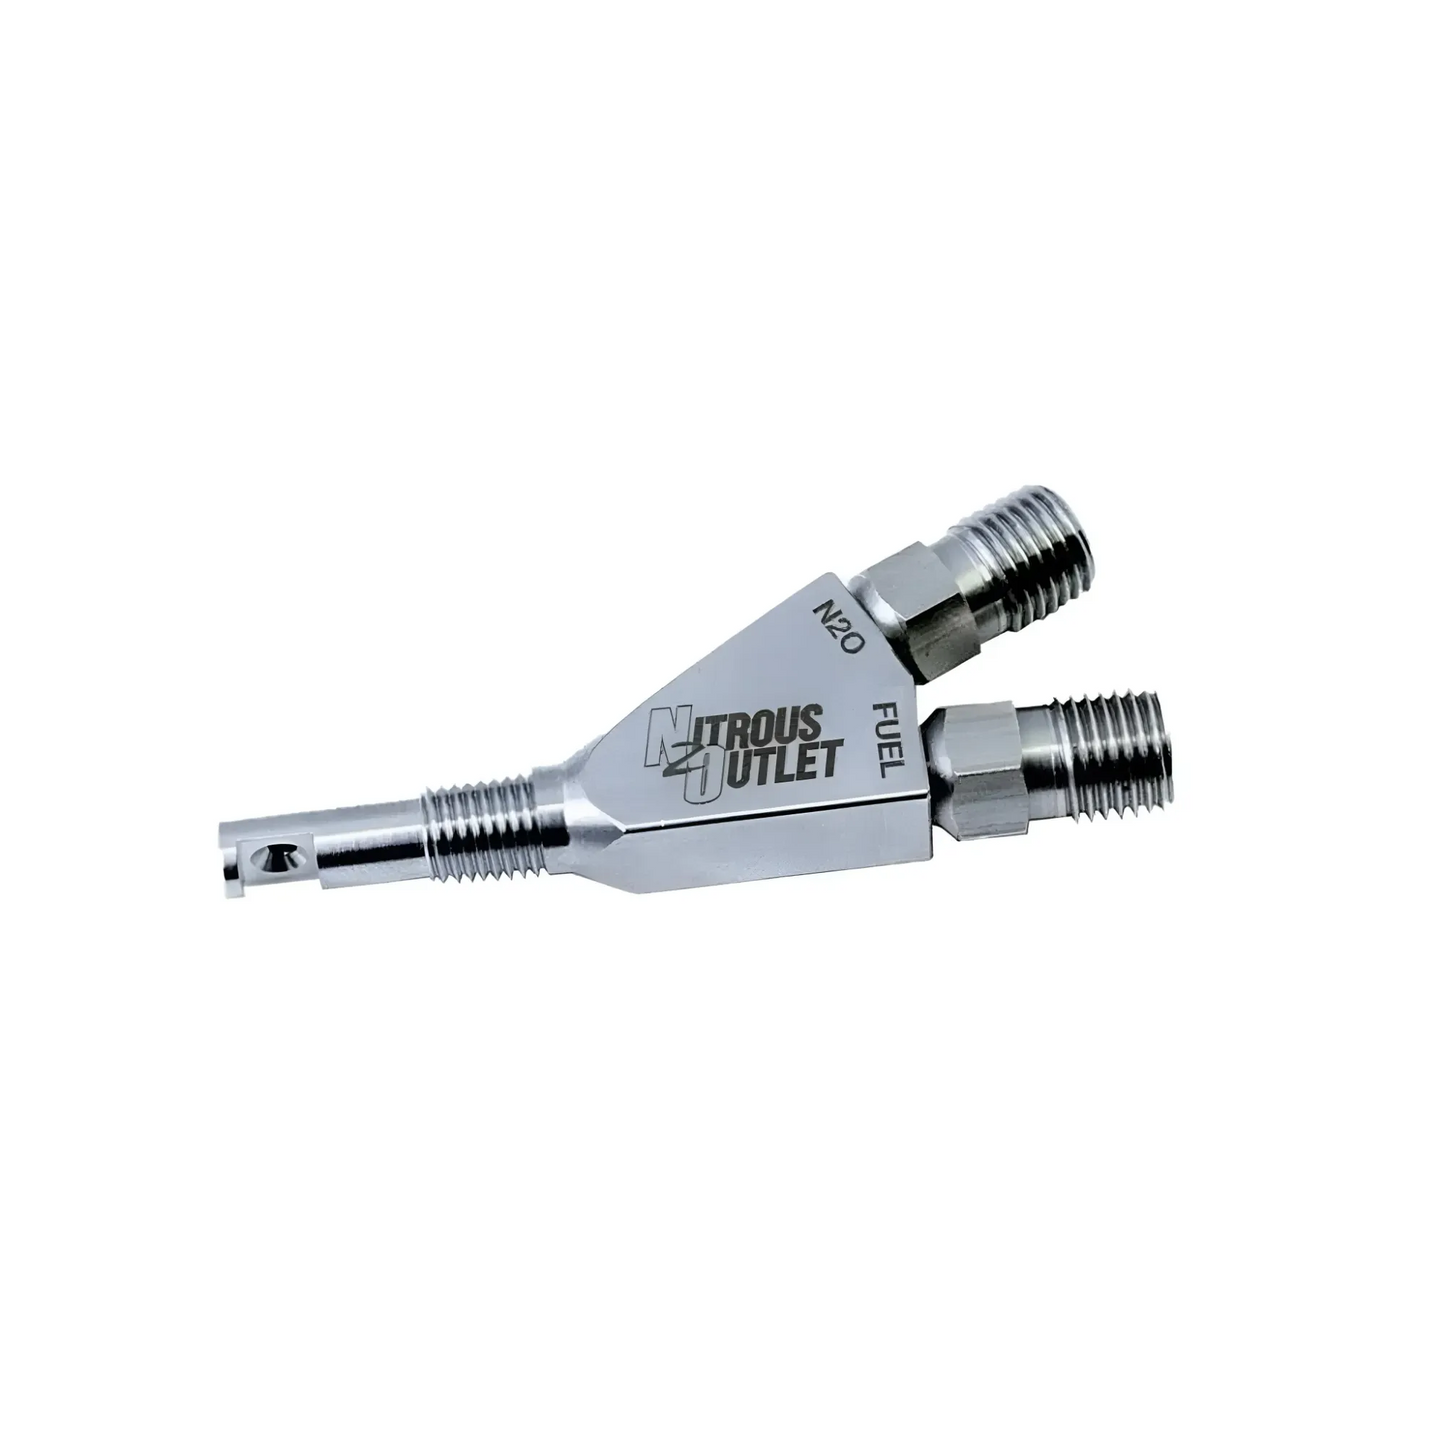 Stainless Steel 90° Discharge Nozzle - 10 Pack